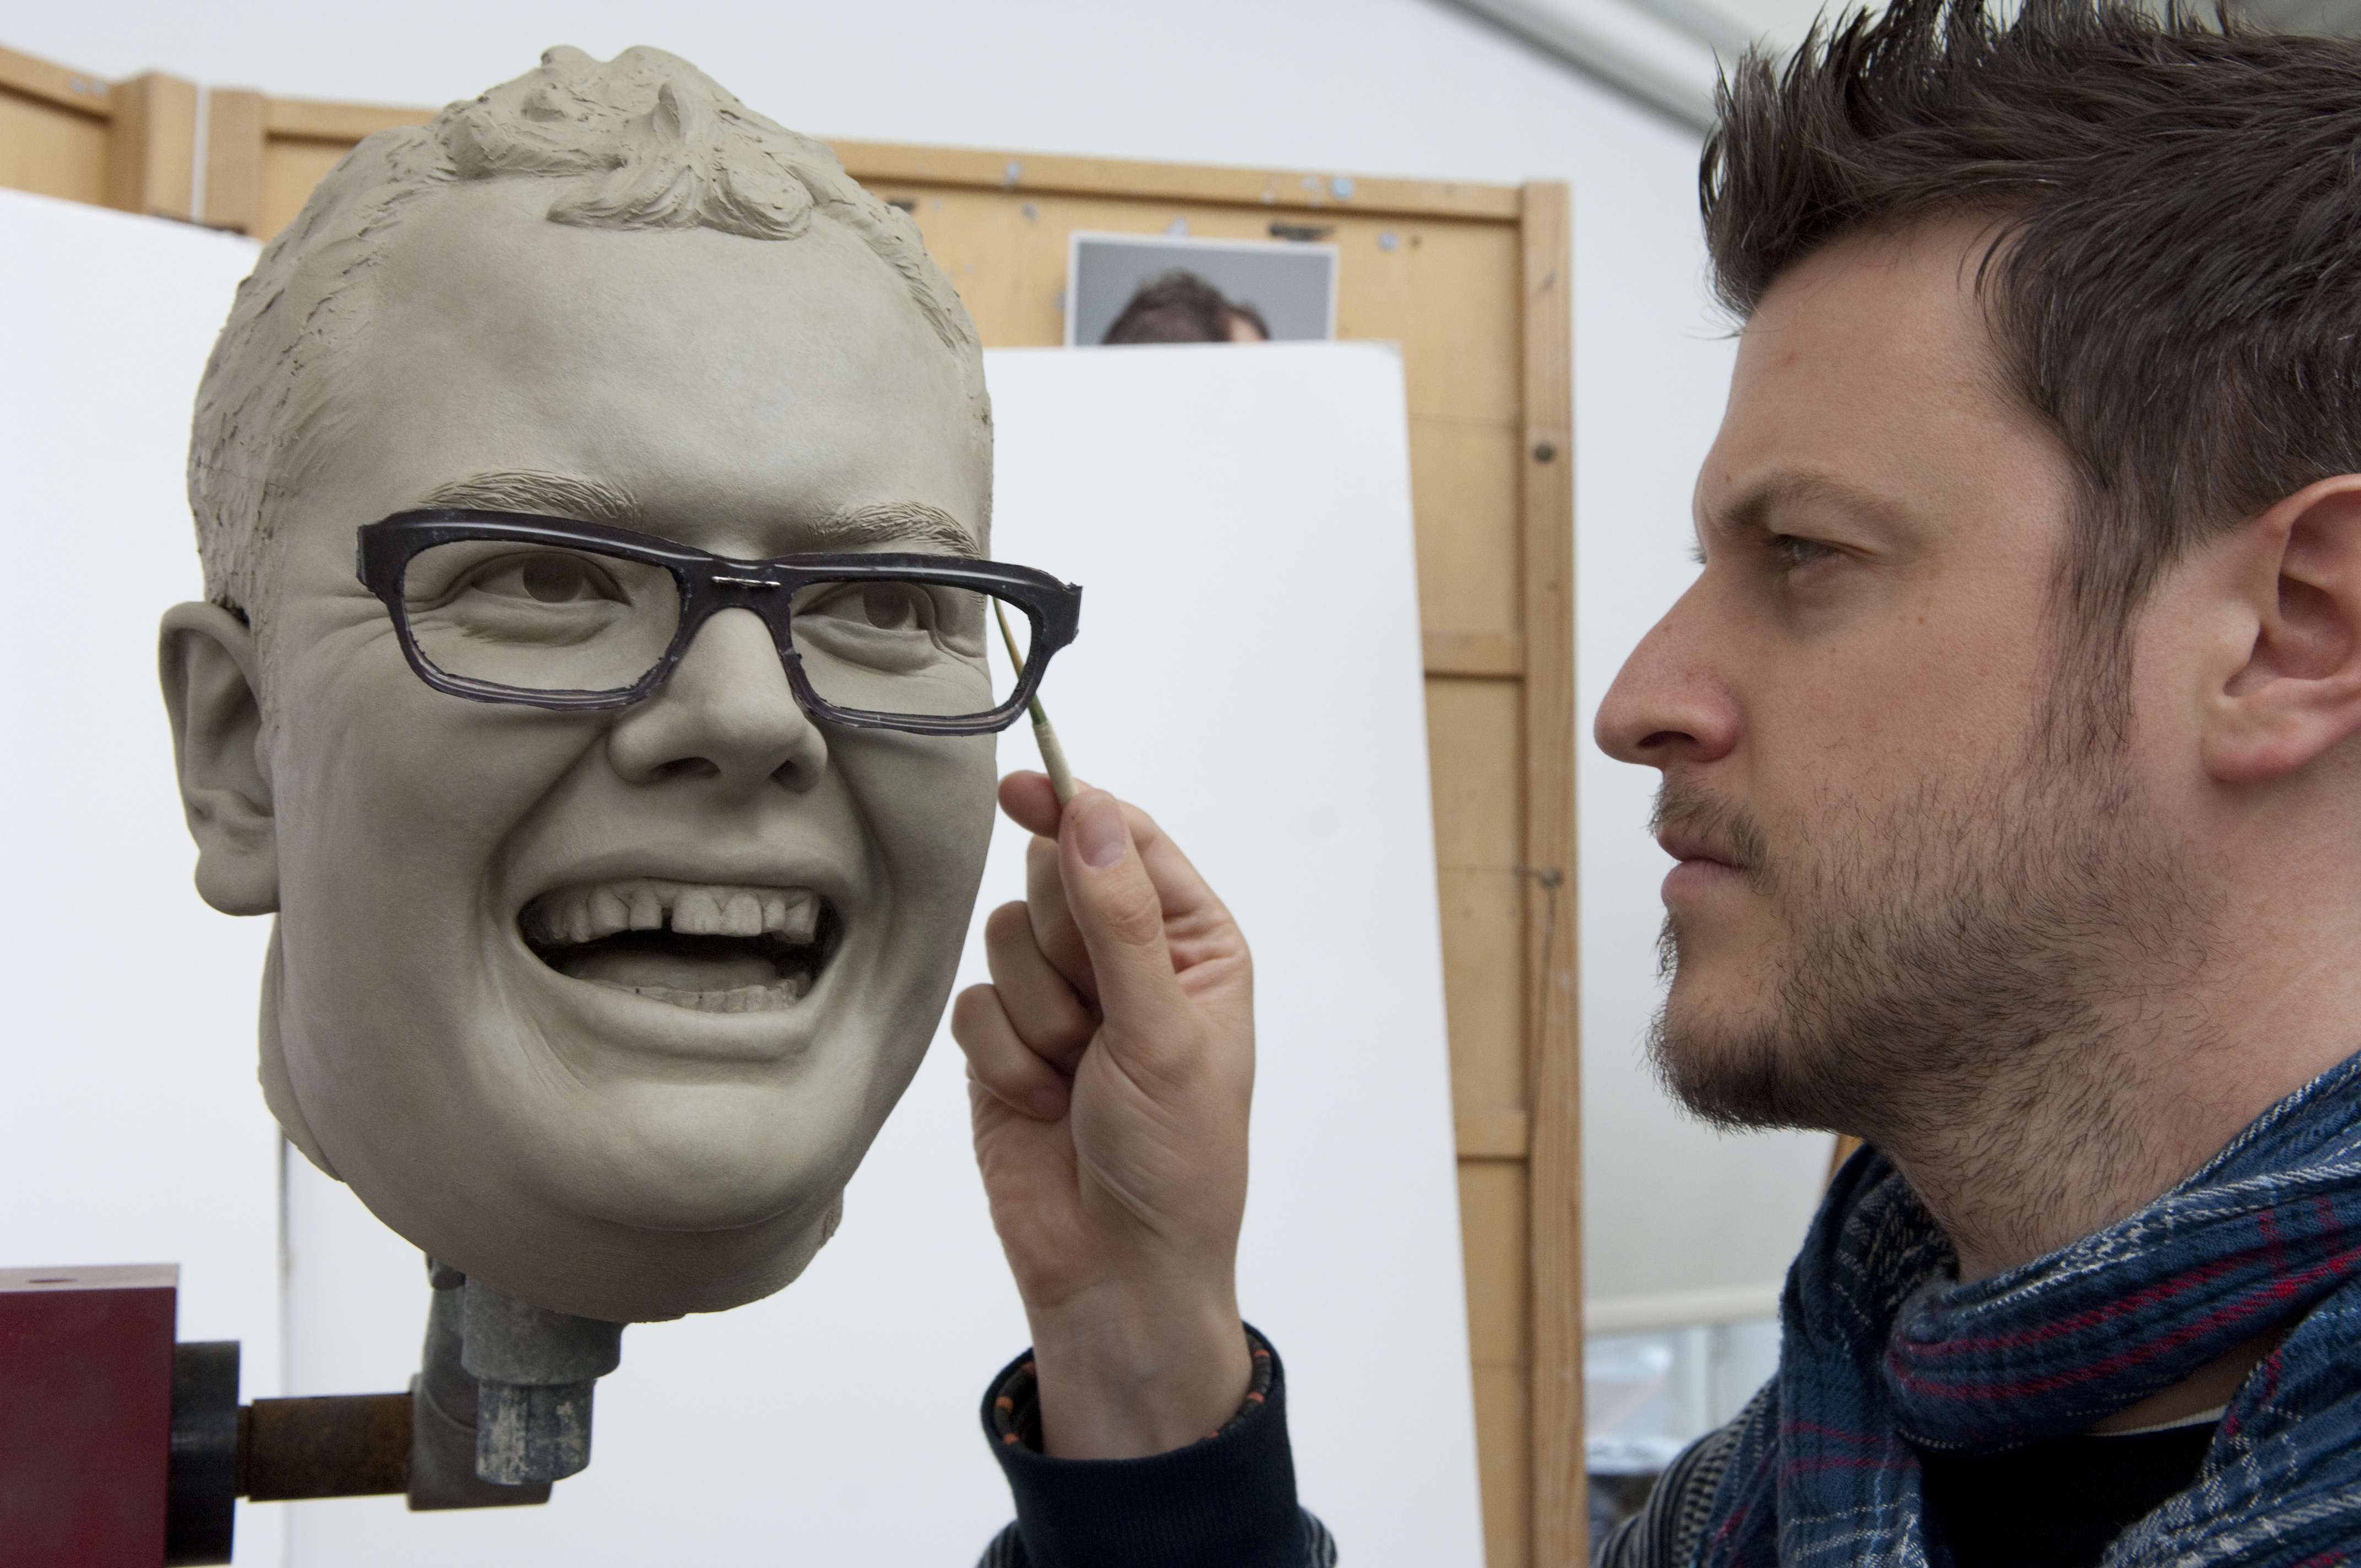 Alan Carr wax figure in clay being worked on